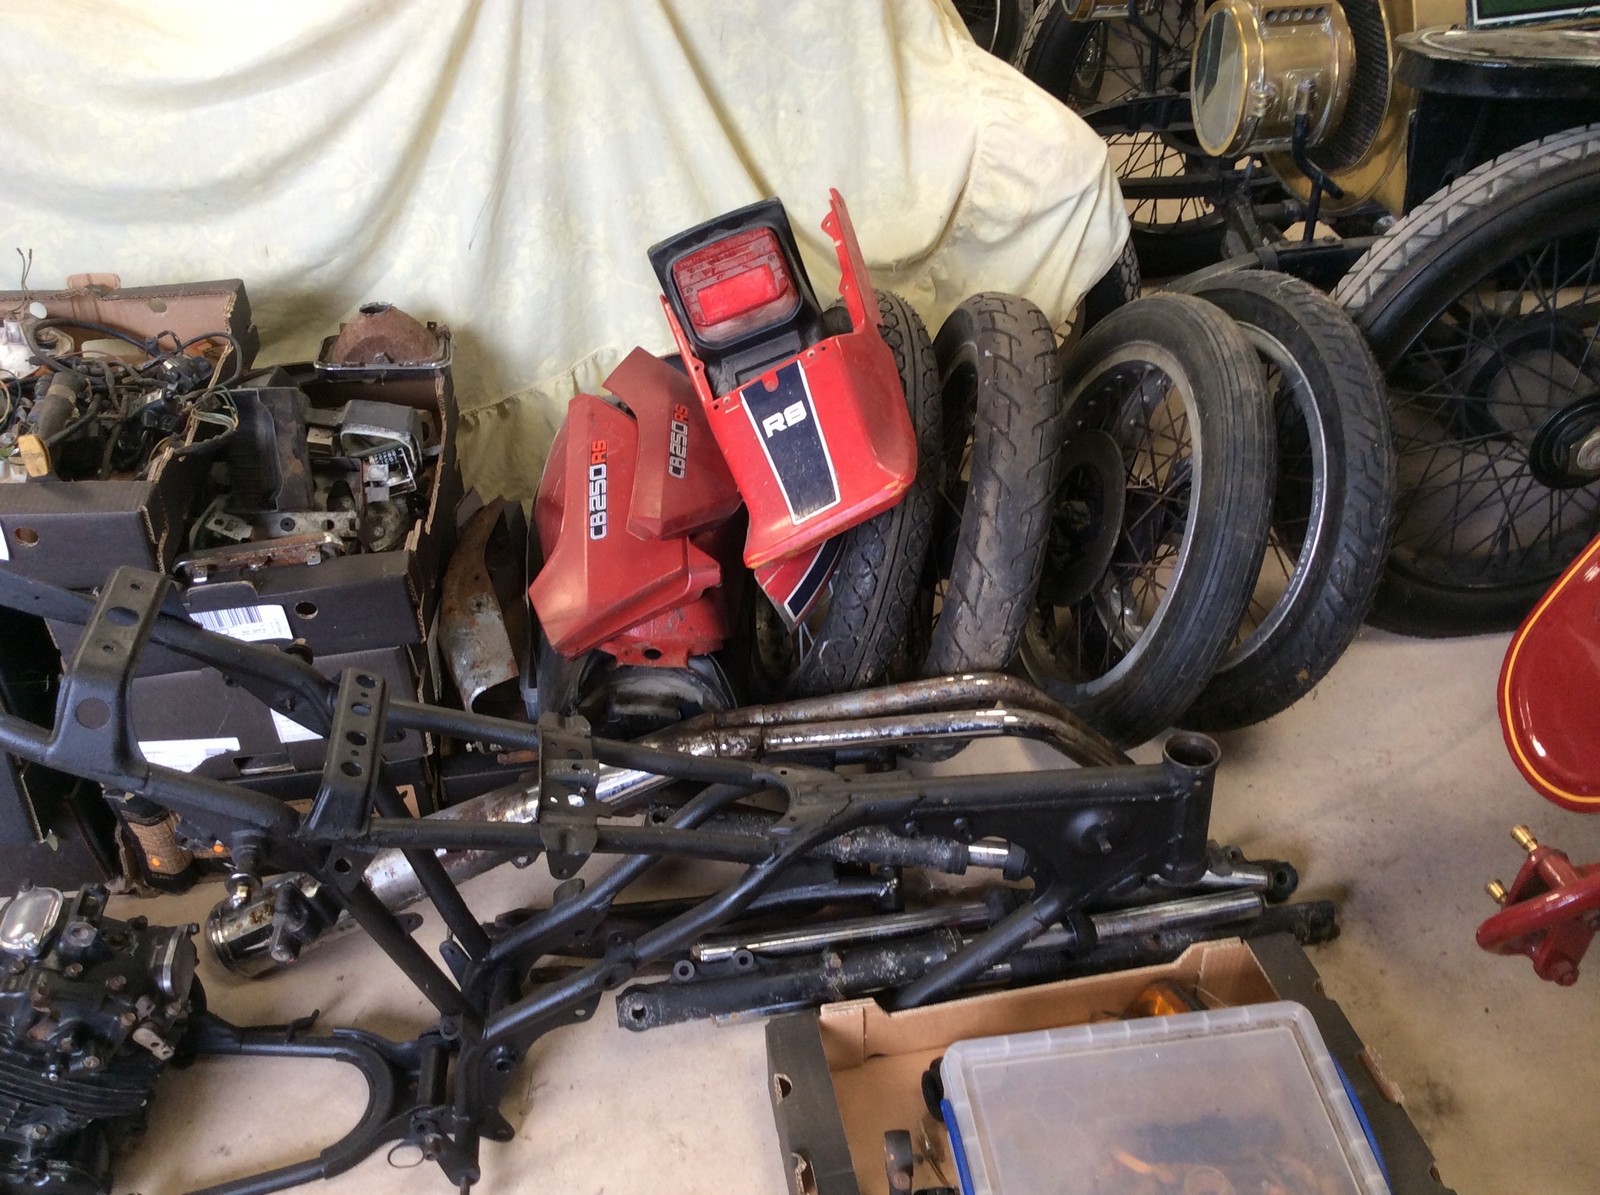 1981 Honda CB 250 RS Completely Dismantled - Image 2 of 9